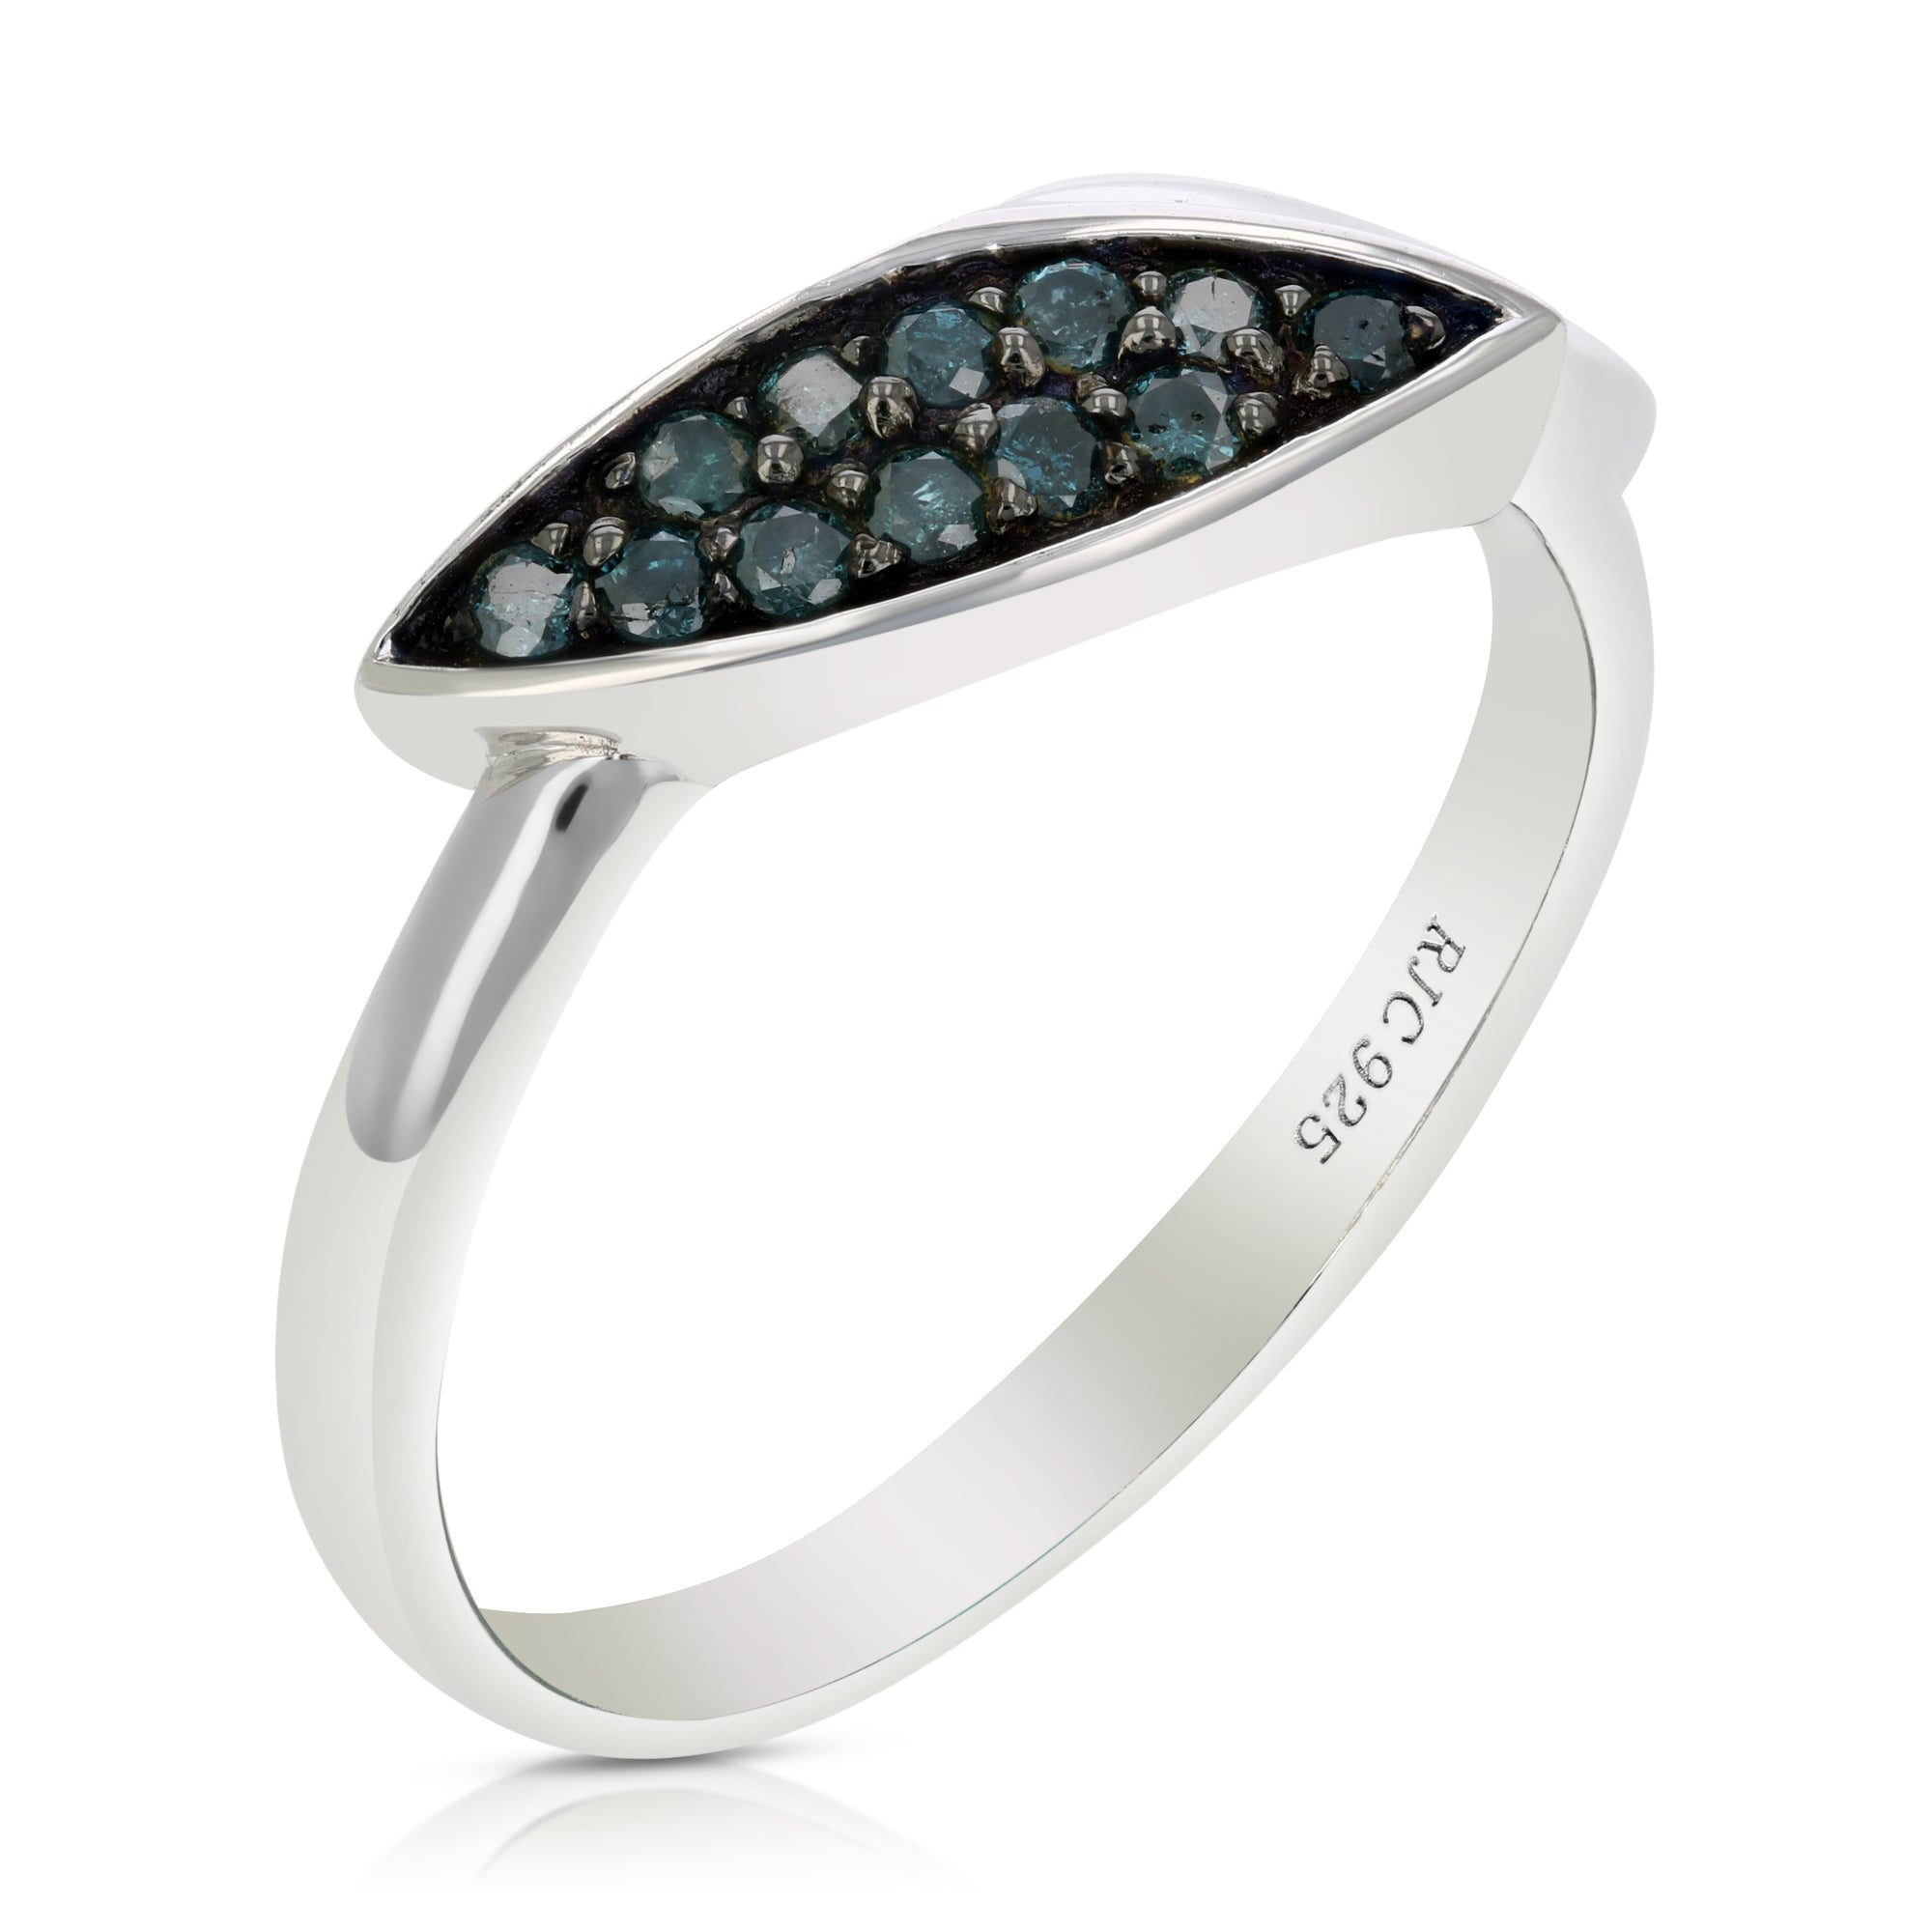 1/5 cttw Blue Diamond Ring .925 Sterling Silver with Rhodium Plating Size 7